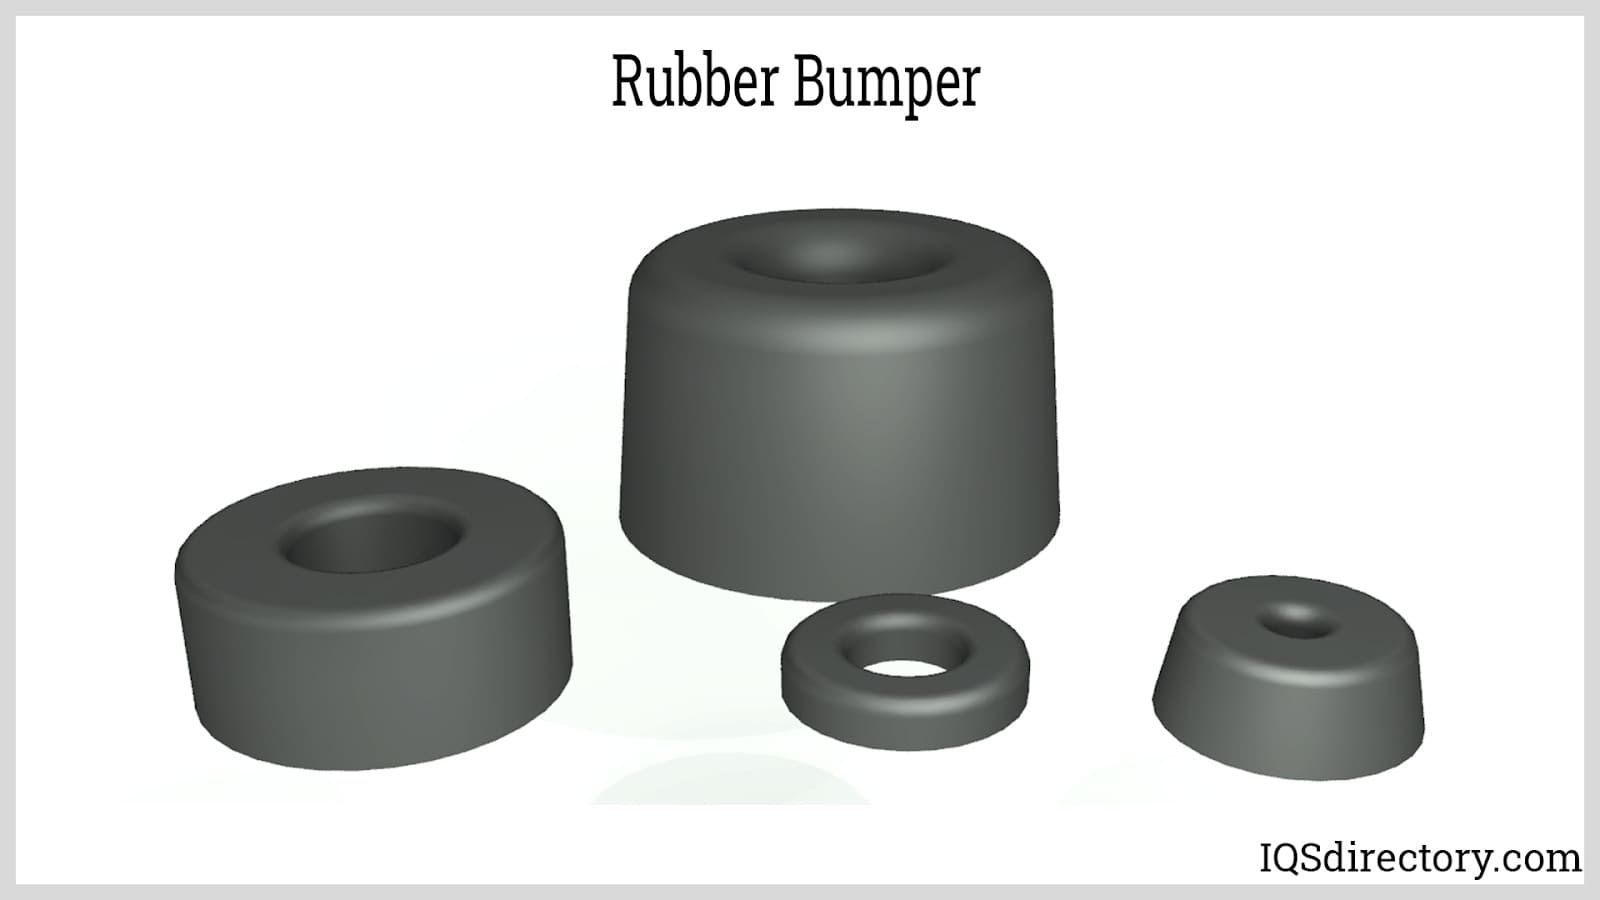 Rubber Bumpers